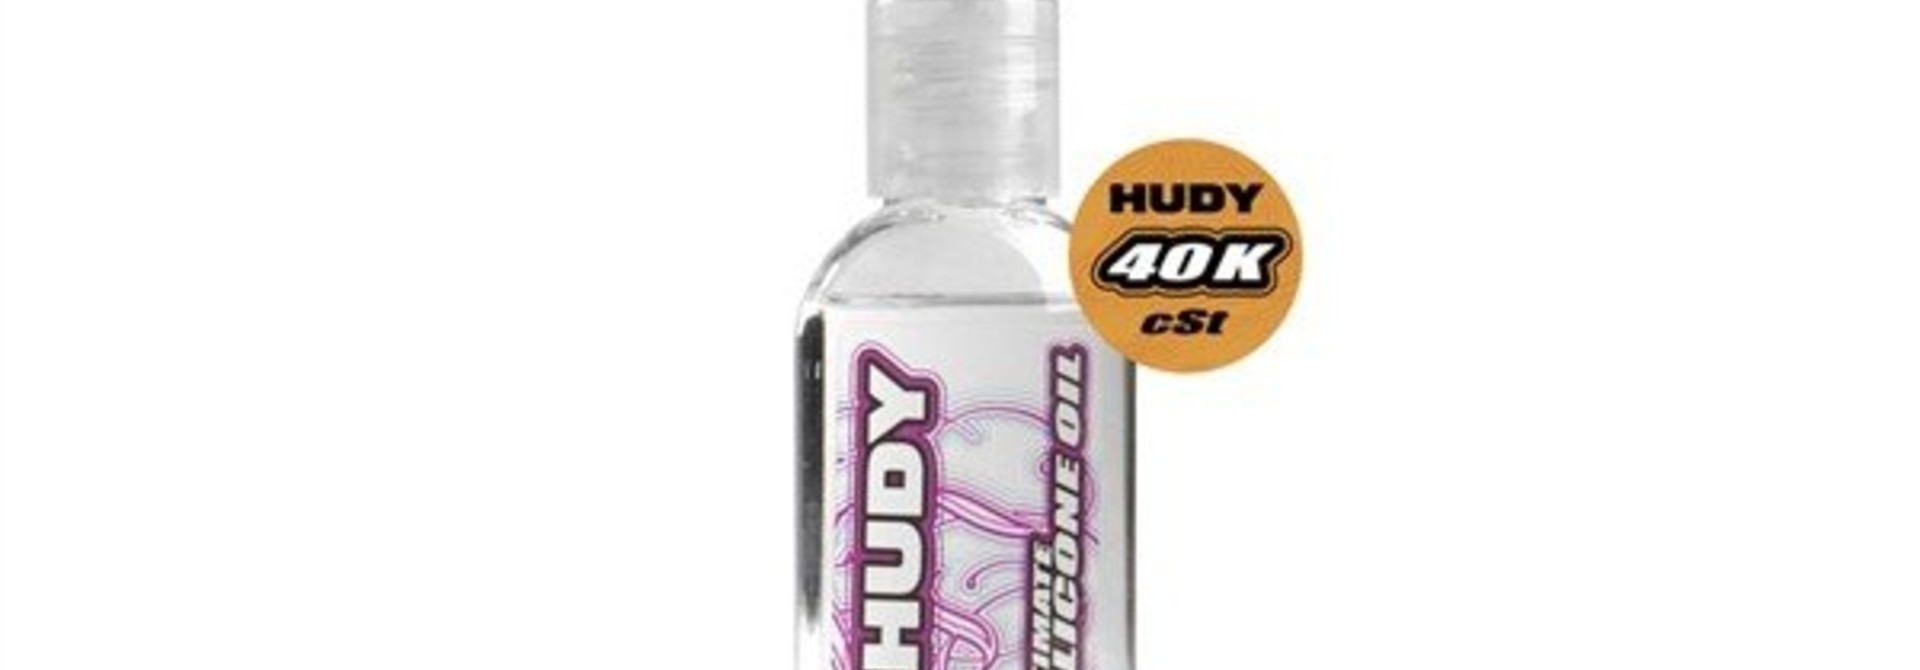 HUDY ULTIMATE SILICONE OIL 40 000 cSt - 50ML. H106540